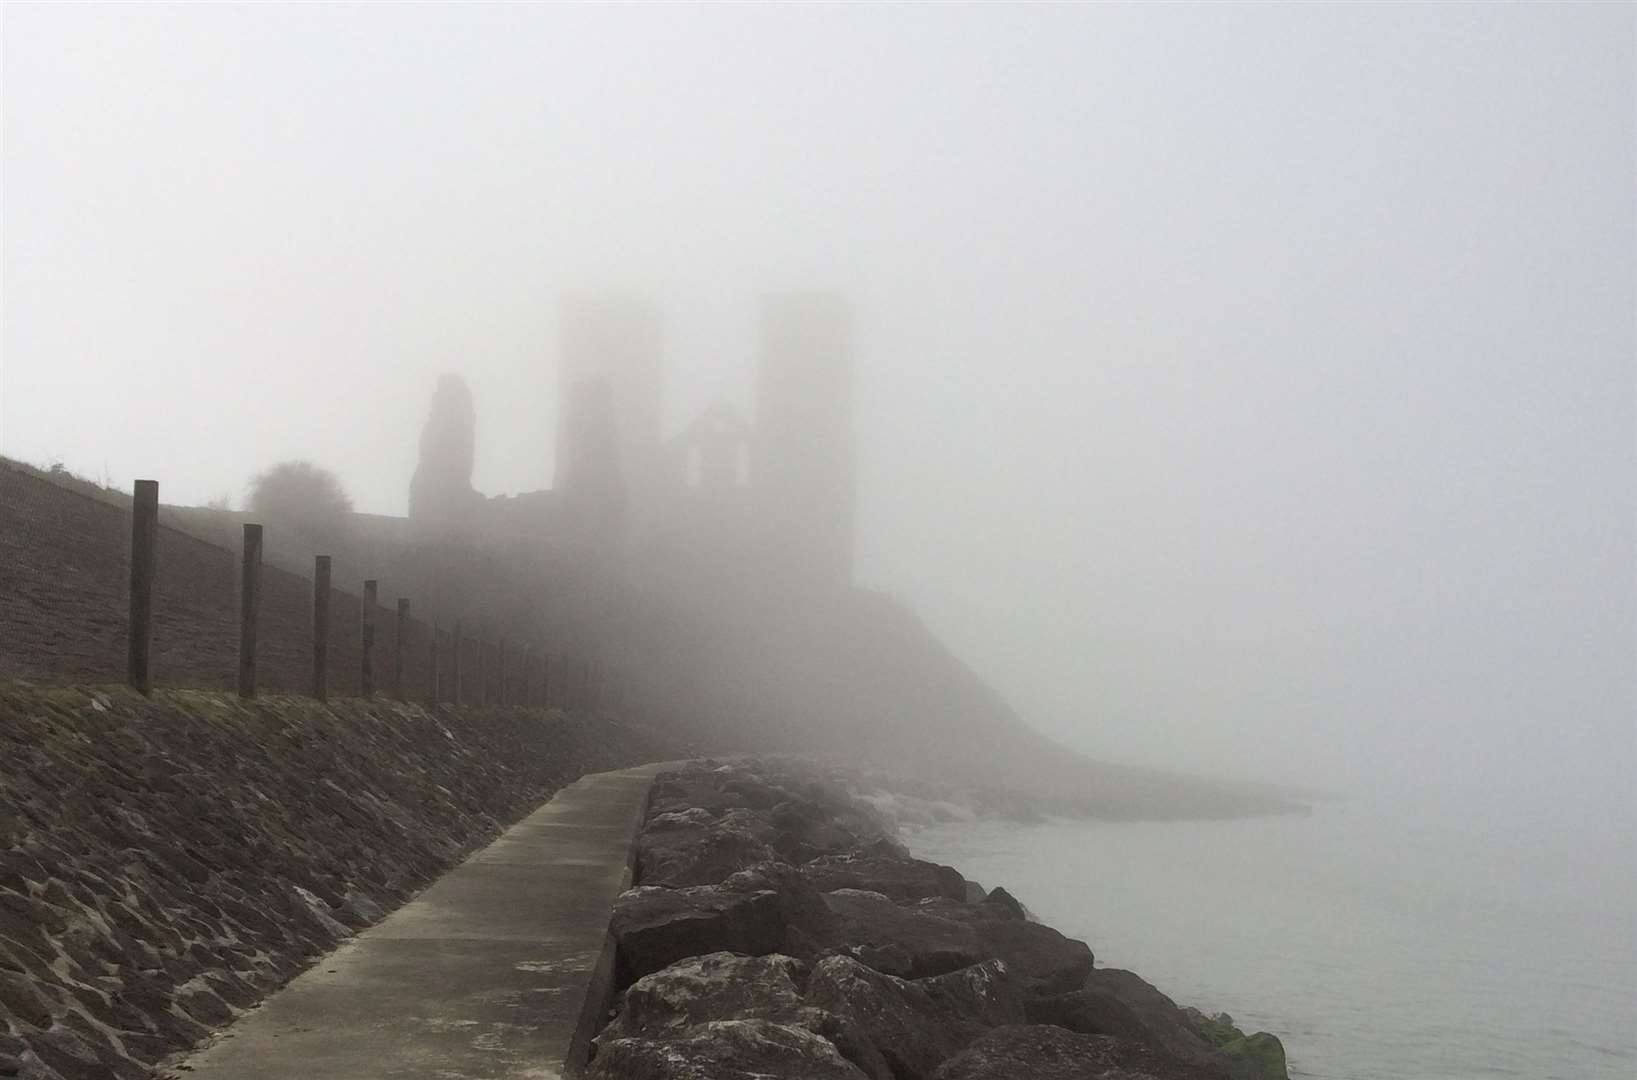 Cries are said to haunt Reculver. Pic: Lynette Coleman